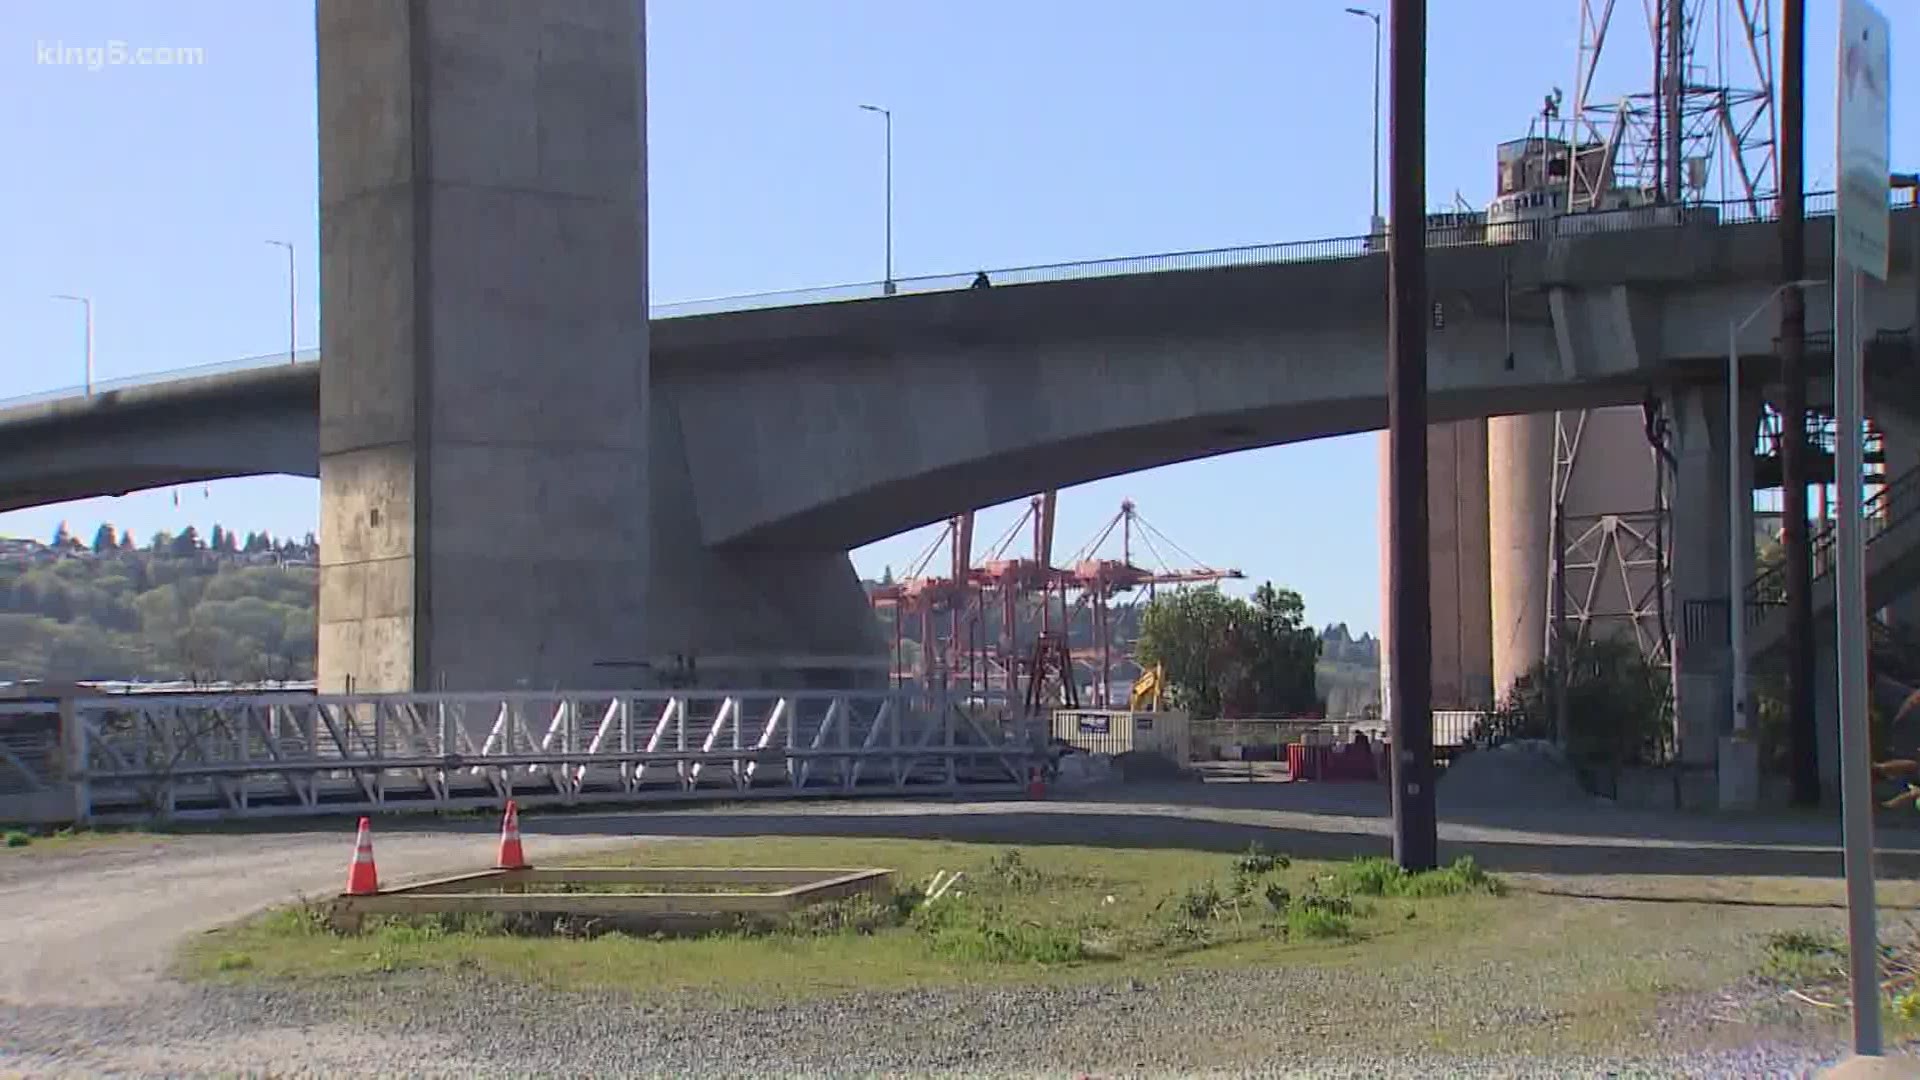 The West Seattle Bridge has a long way to go before it can reopen after large structural cracks were found, which SDOT doesn't even know if they can repair.